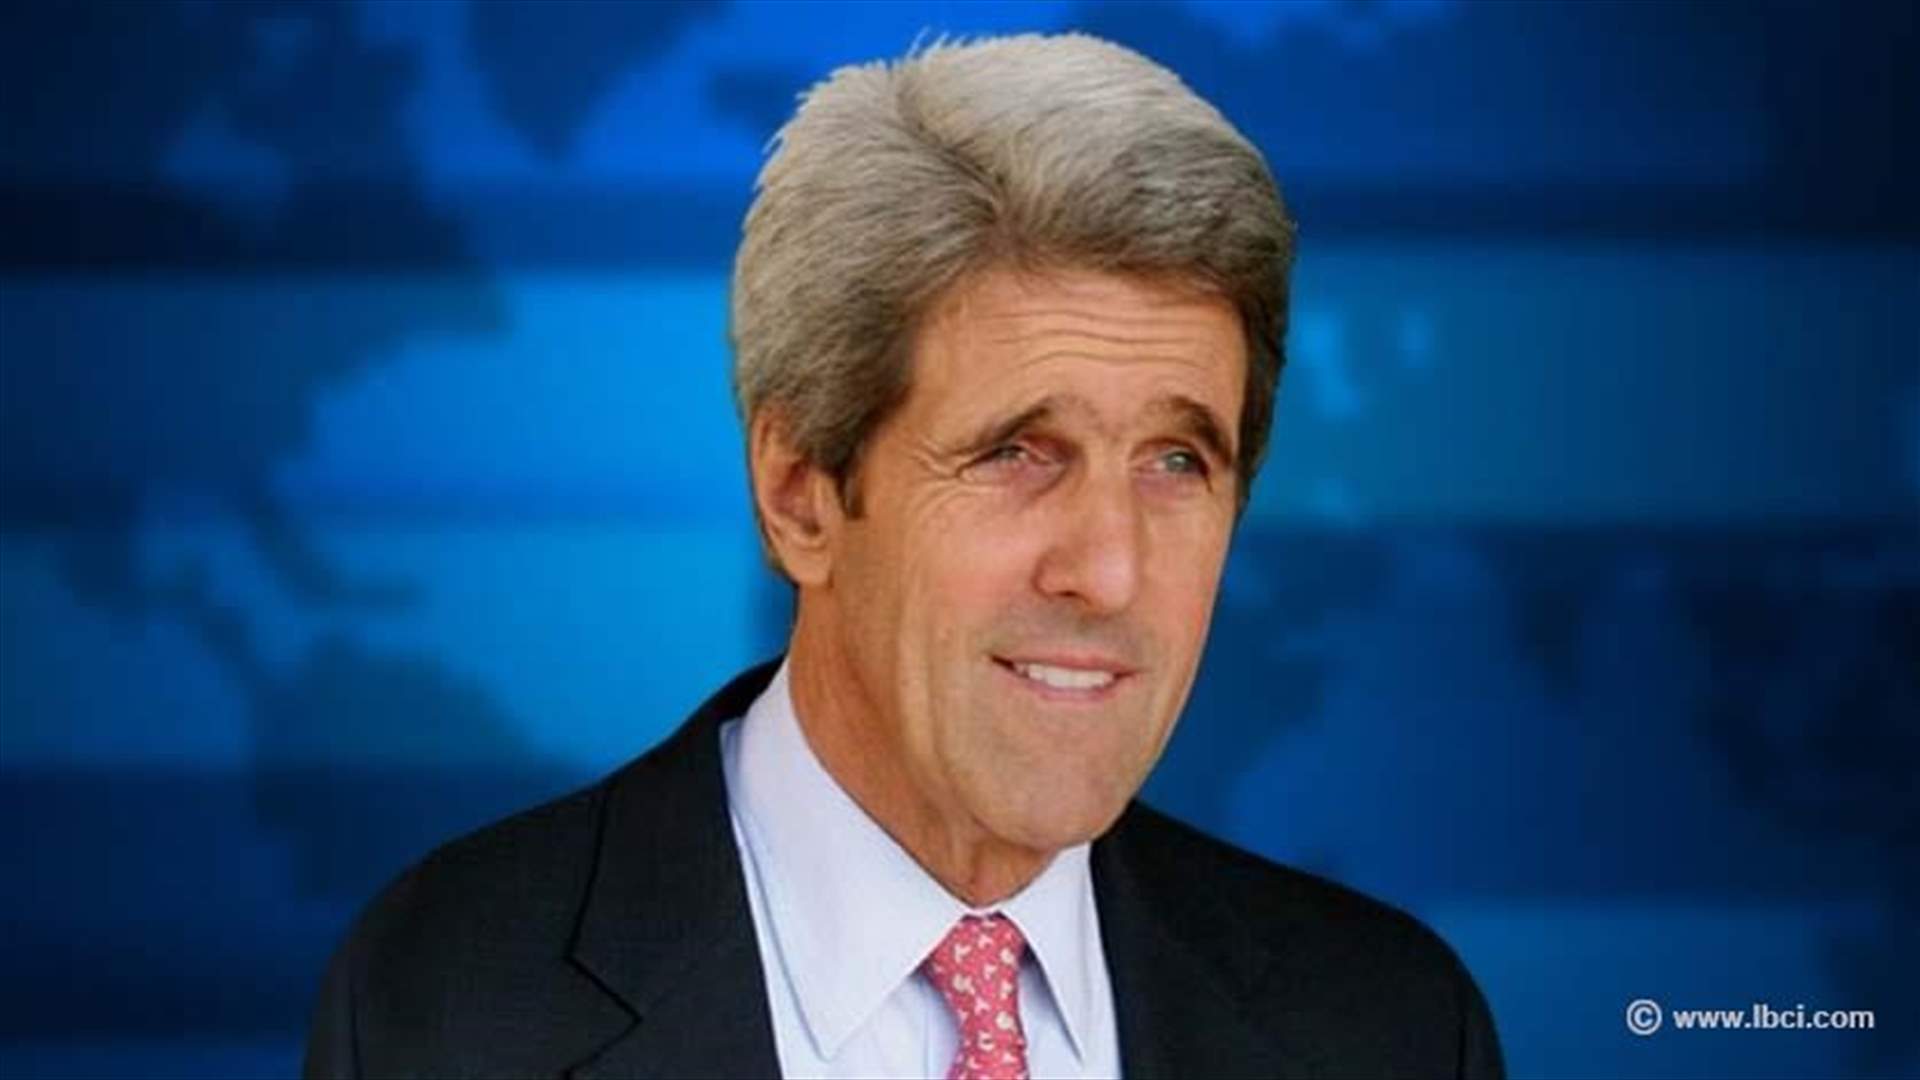 Syrian government signaling aim of military, not political, solution -Kerry